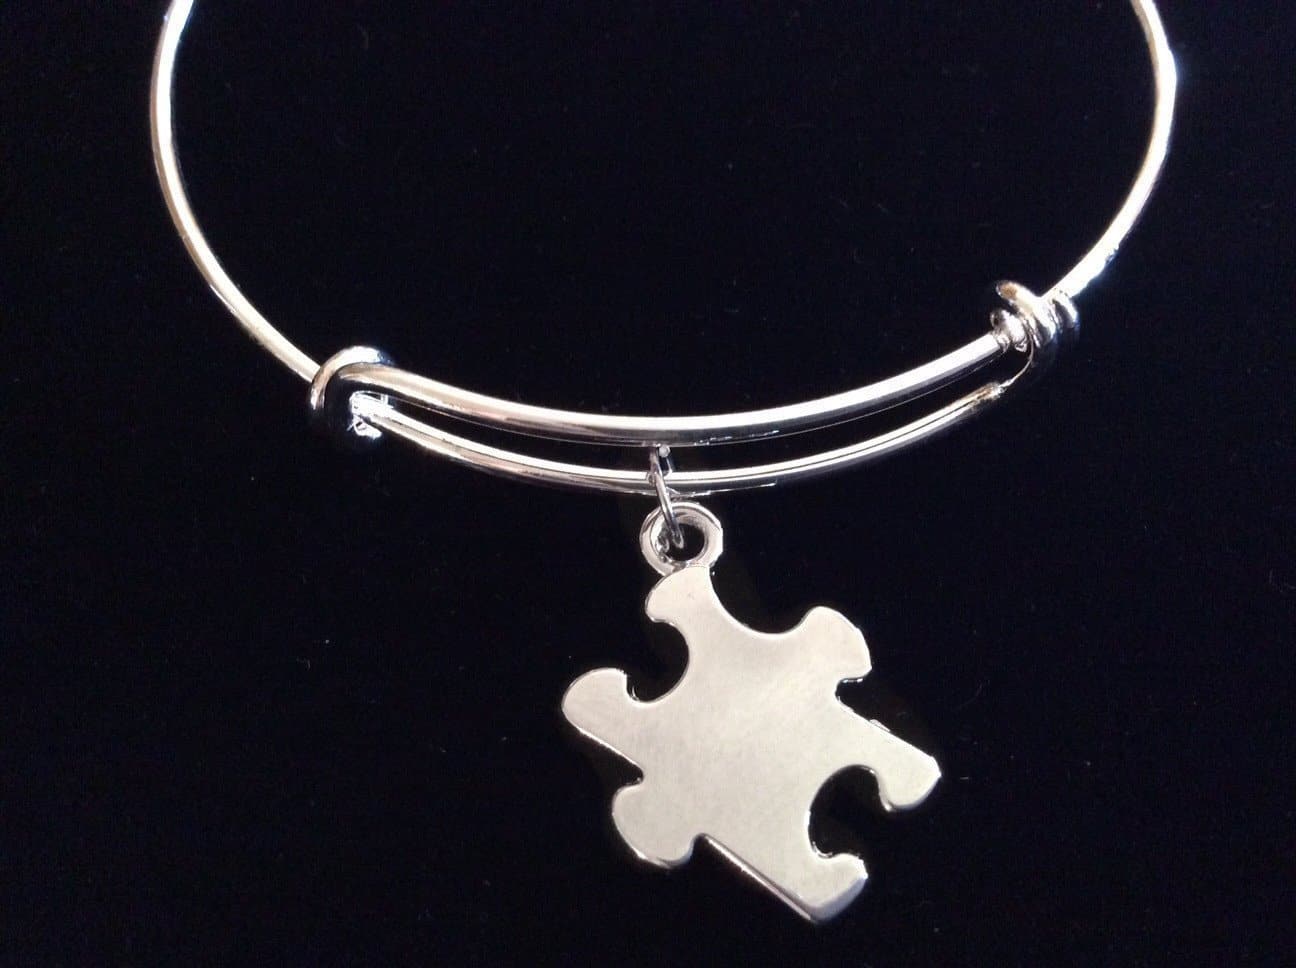 Buy Puzzle Bracelet in 925 Silver With Personalized Engraving Online in  India - Etsy